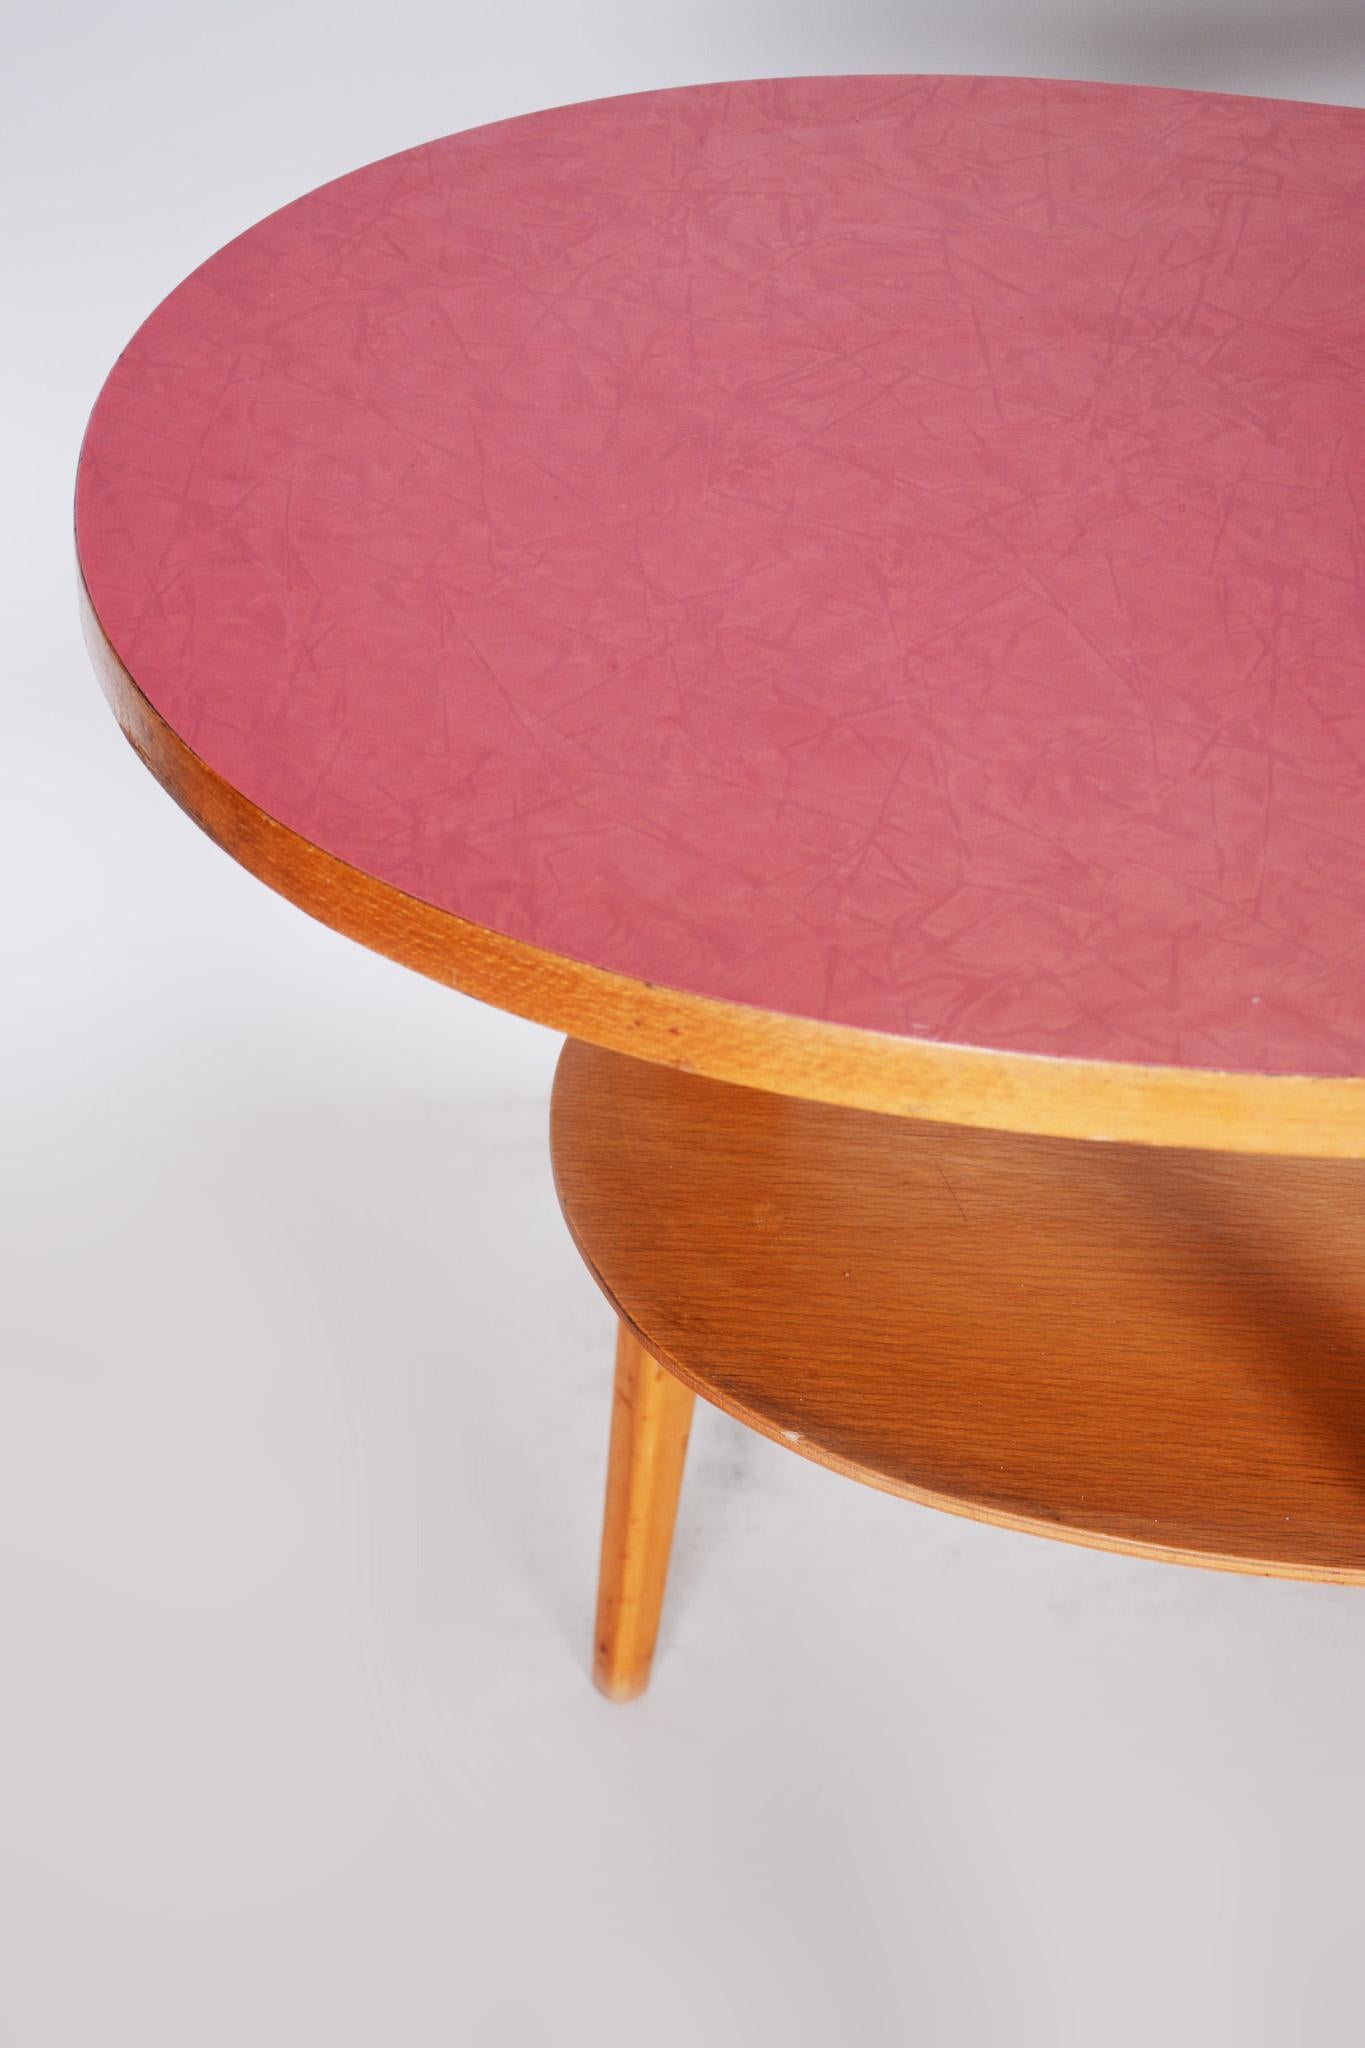 Small Beech Table, Czech Midcentury, Preserved in Original Condition, 1950s For Sale 2